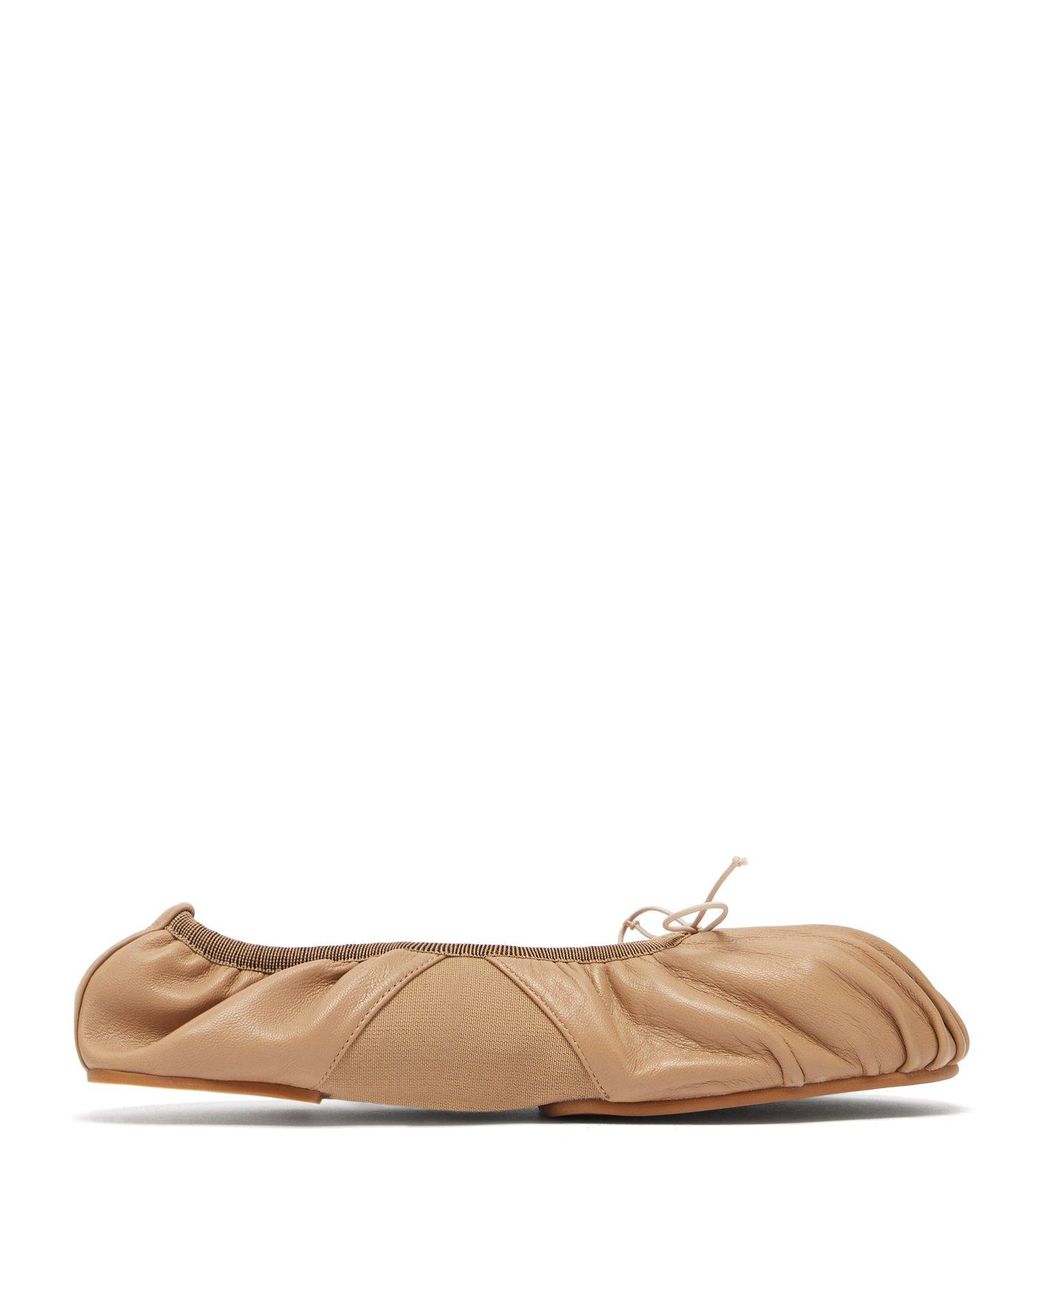 Acne Studios Ruched Leather Ballet Flats in Natural | Lyst